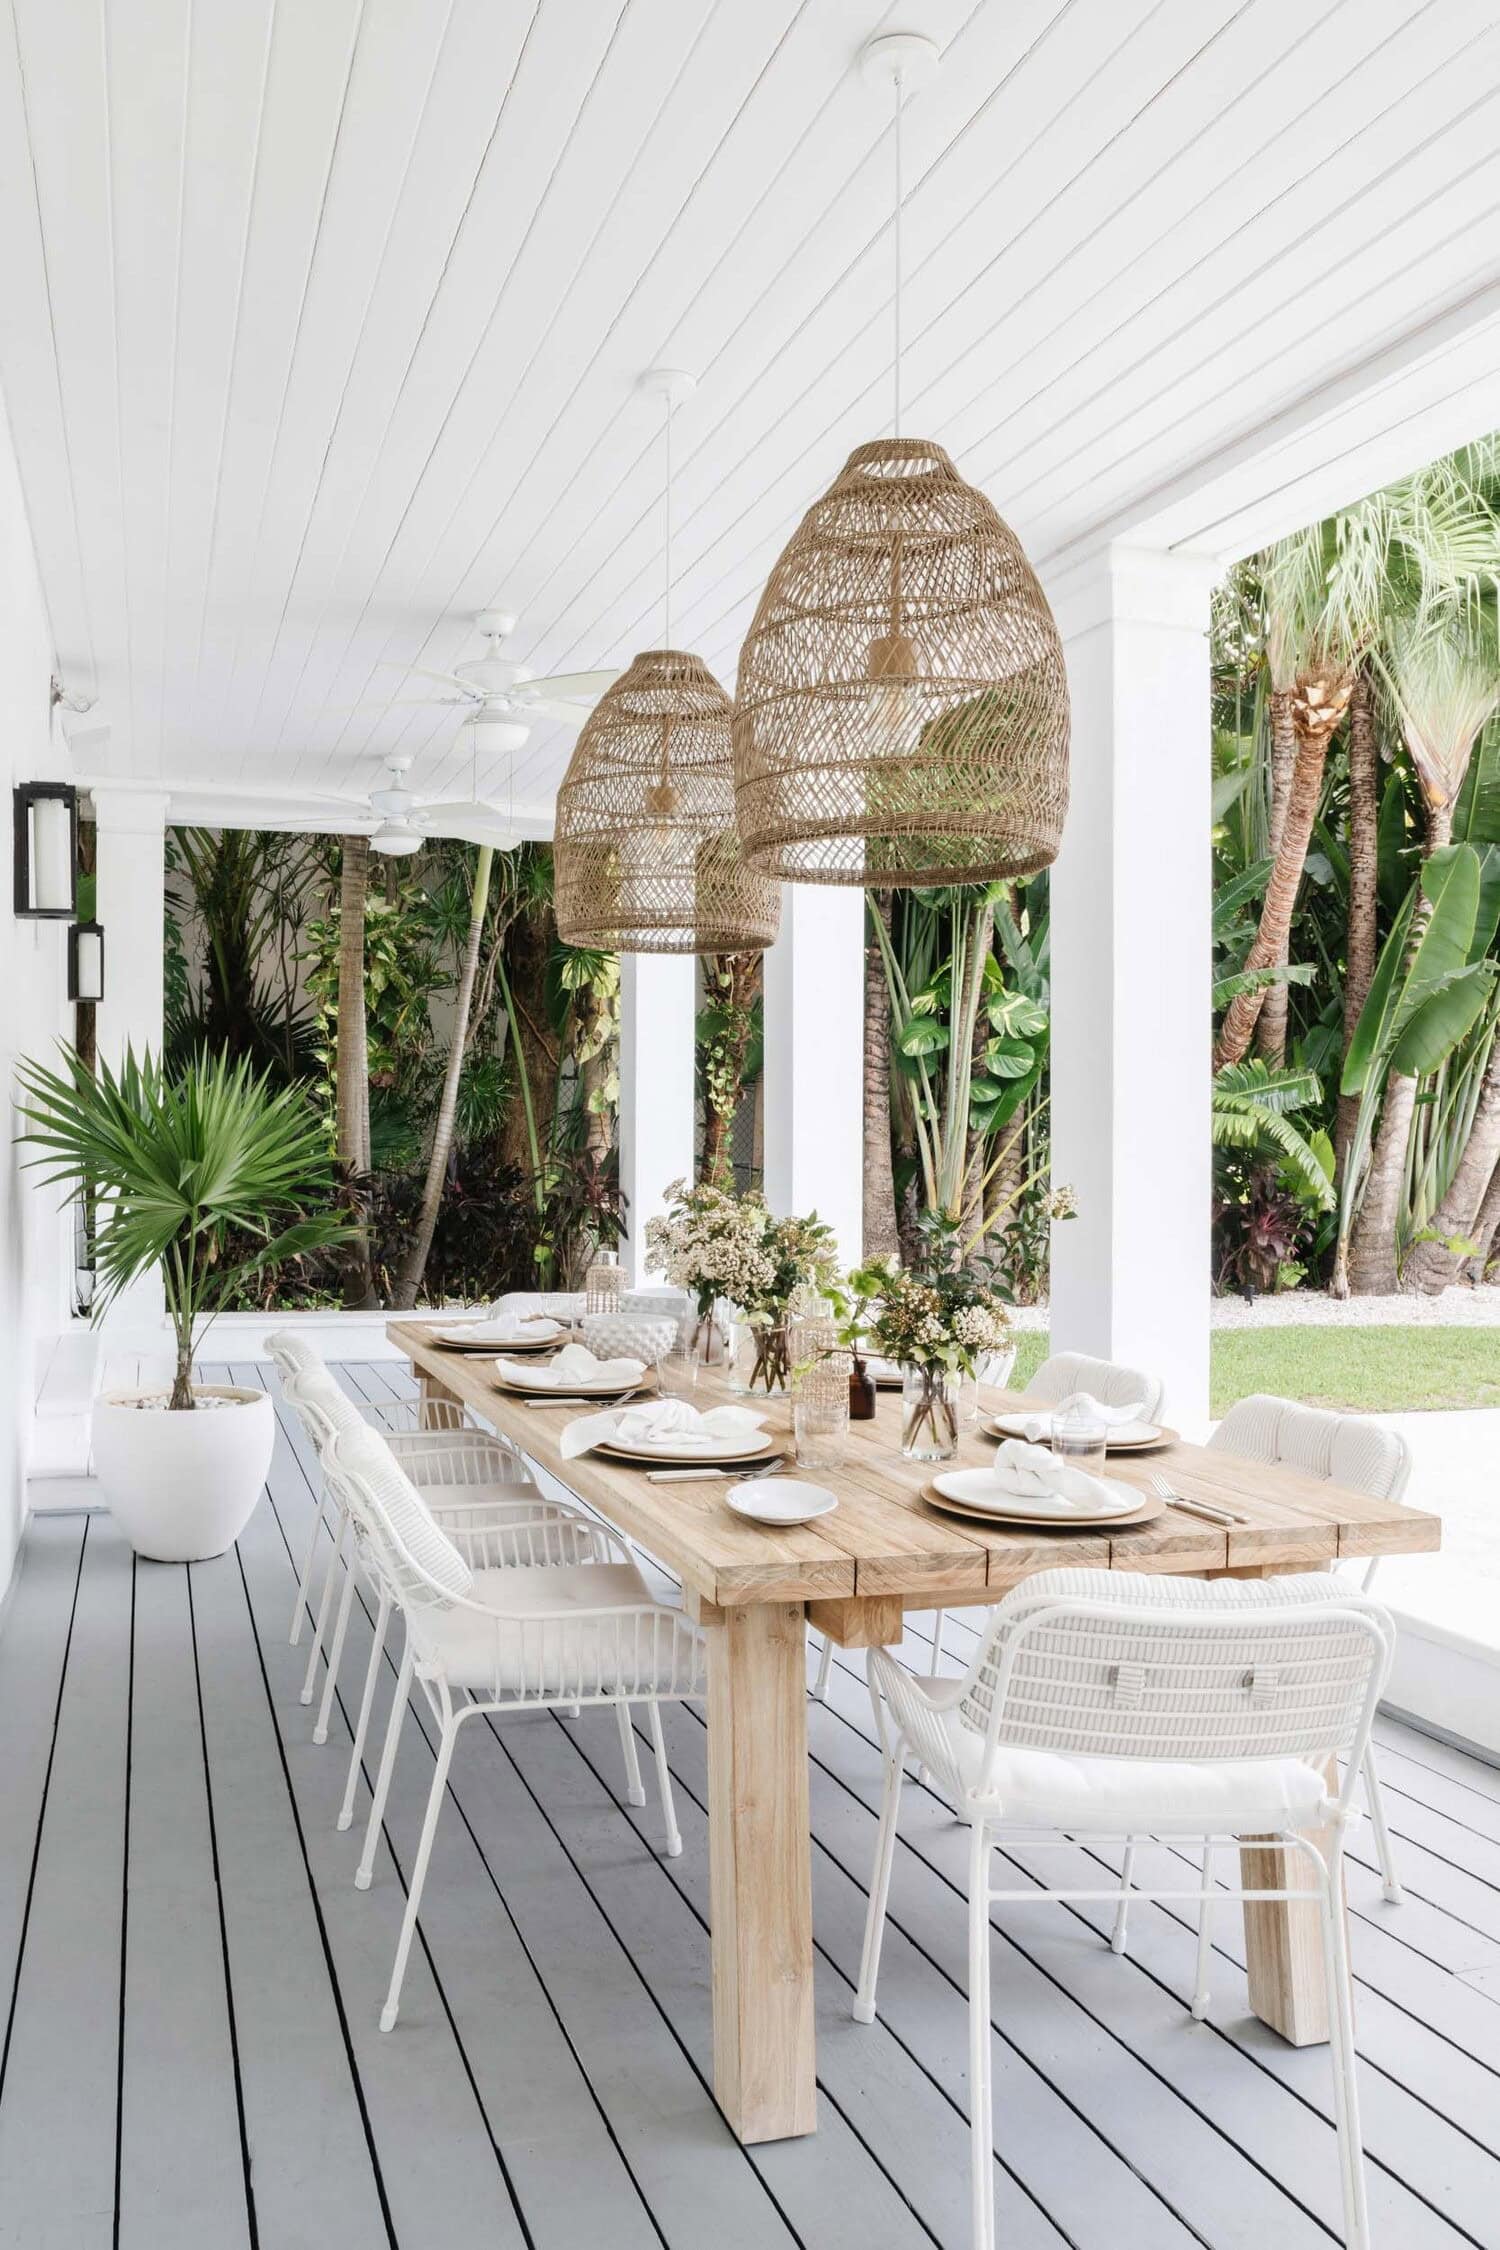 Tropical decor style outdoor gallery featuring a dining table and rustic tropical decor lamps